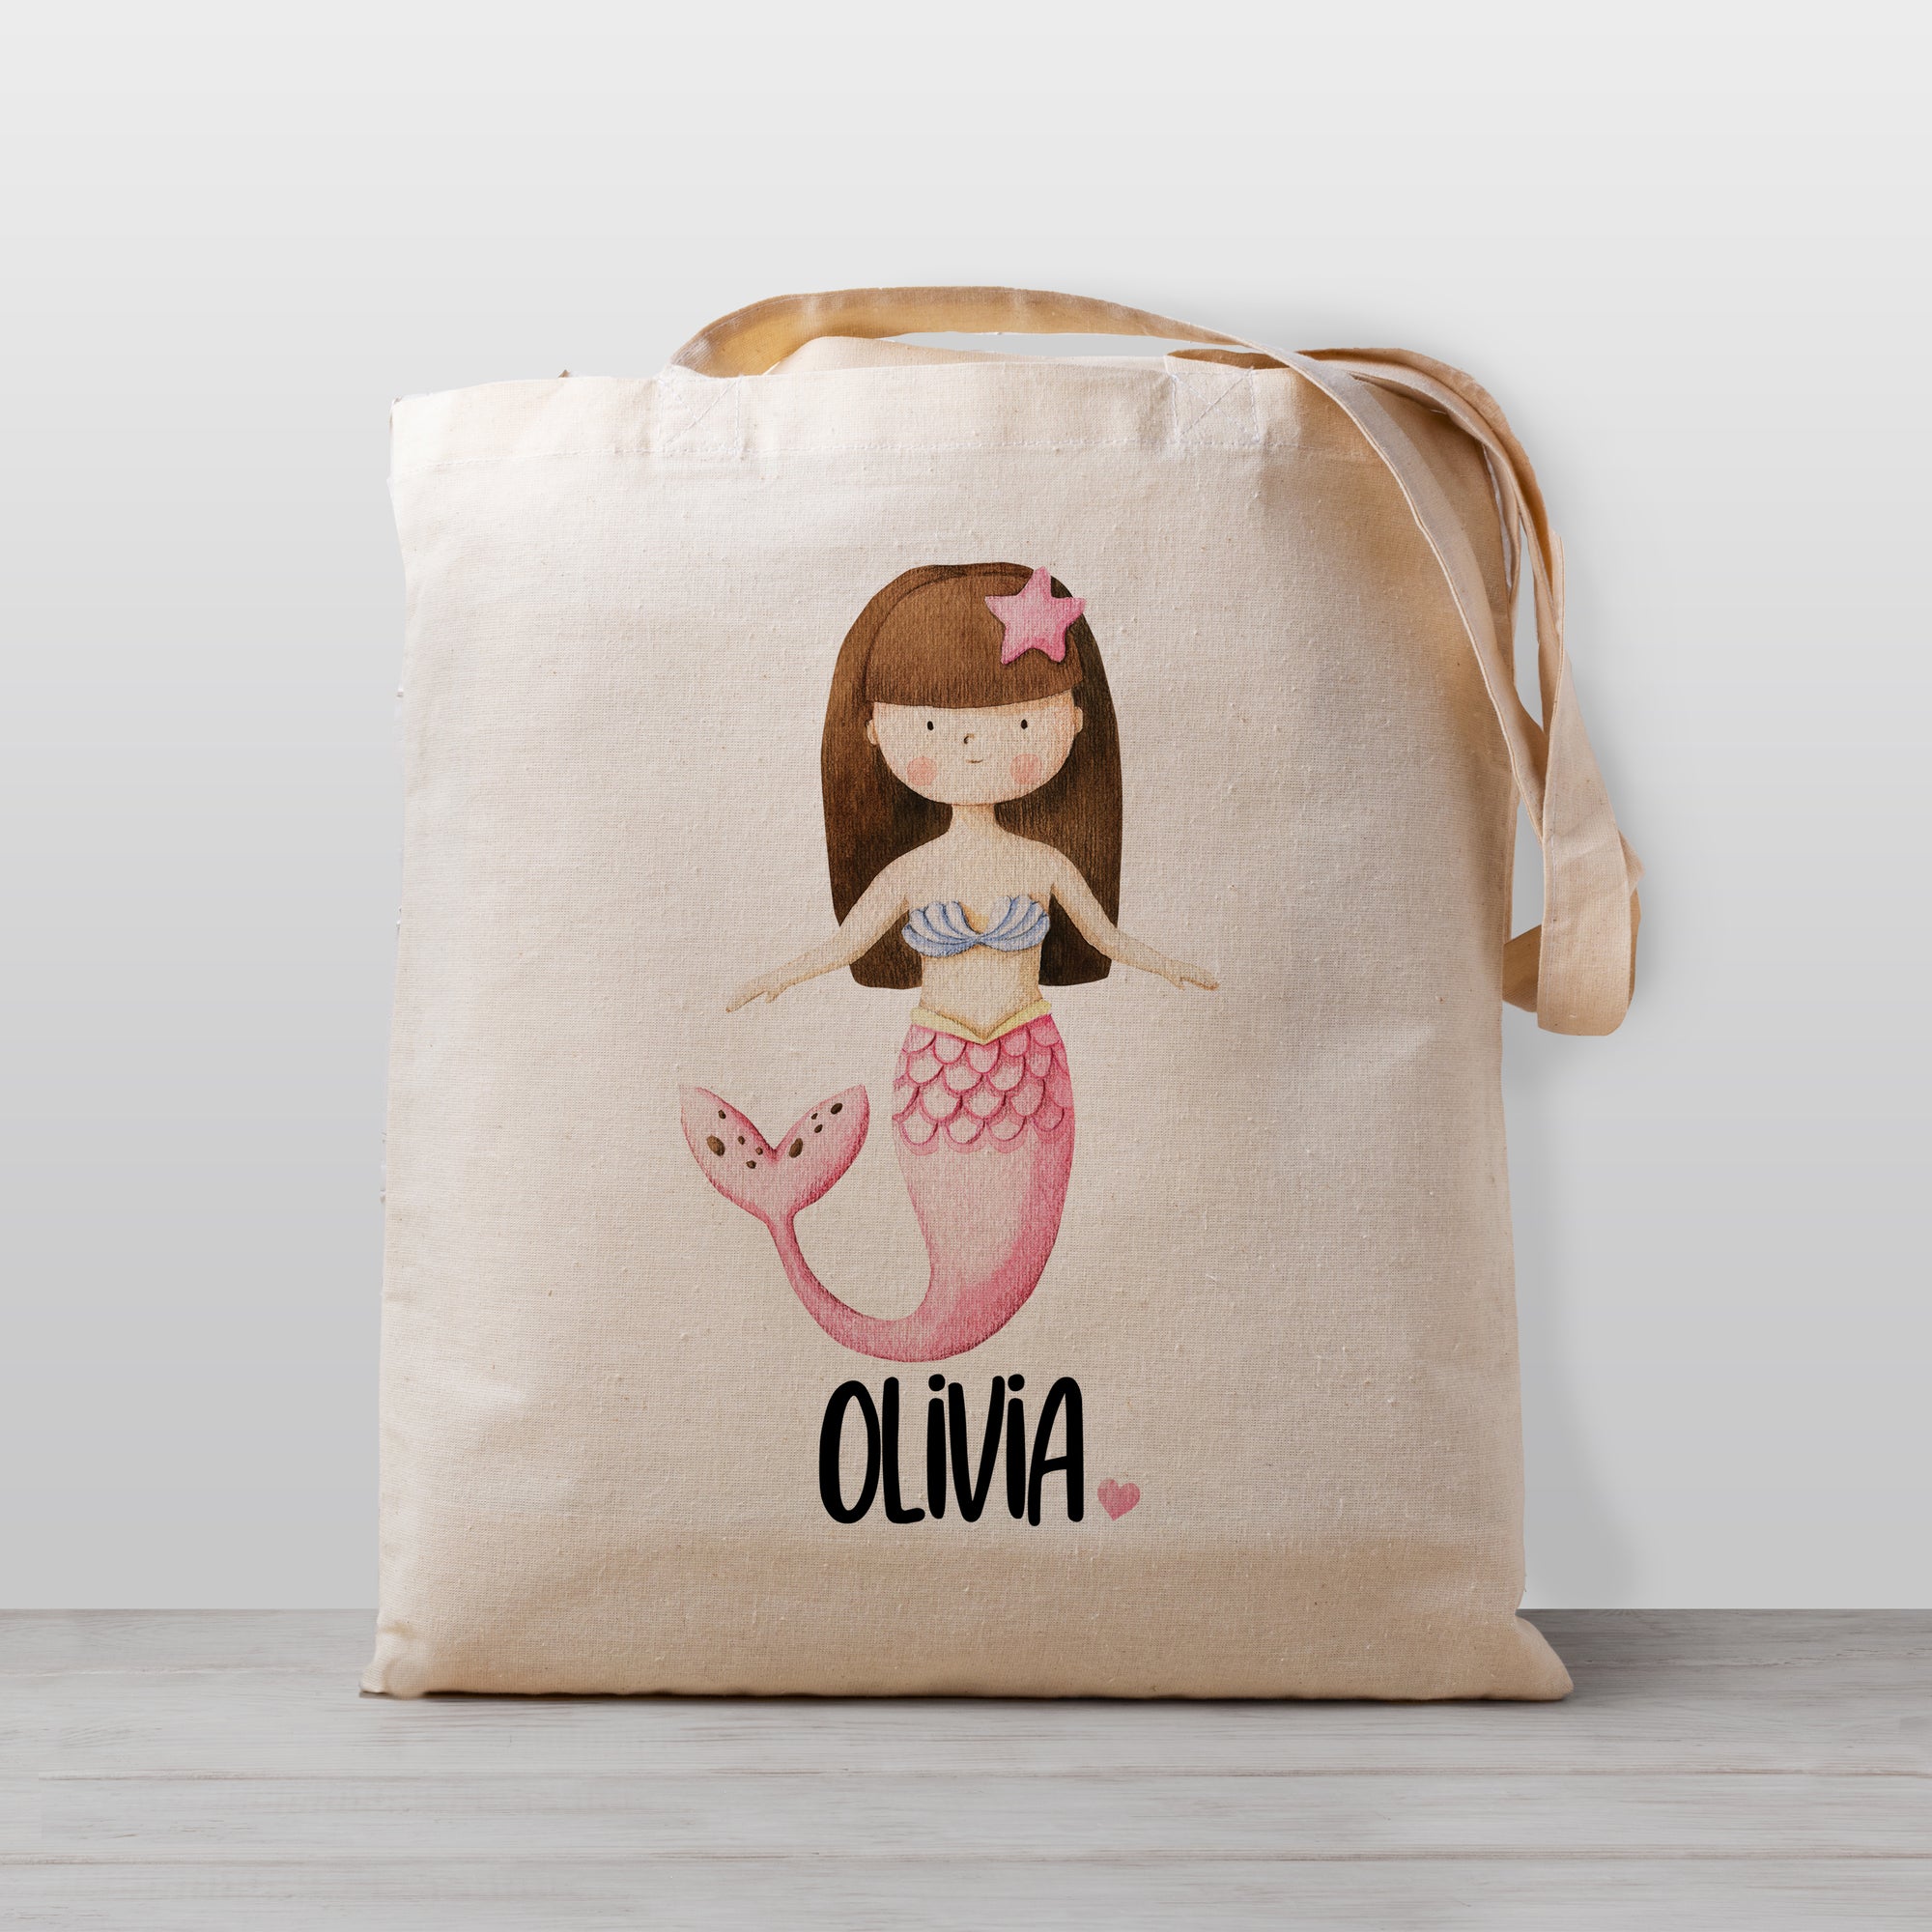 Mermaid tote bag personalized with name, 100% natural cotton canvas